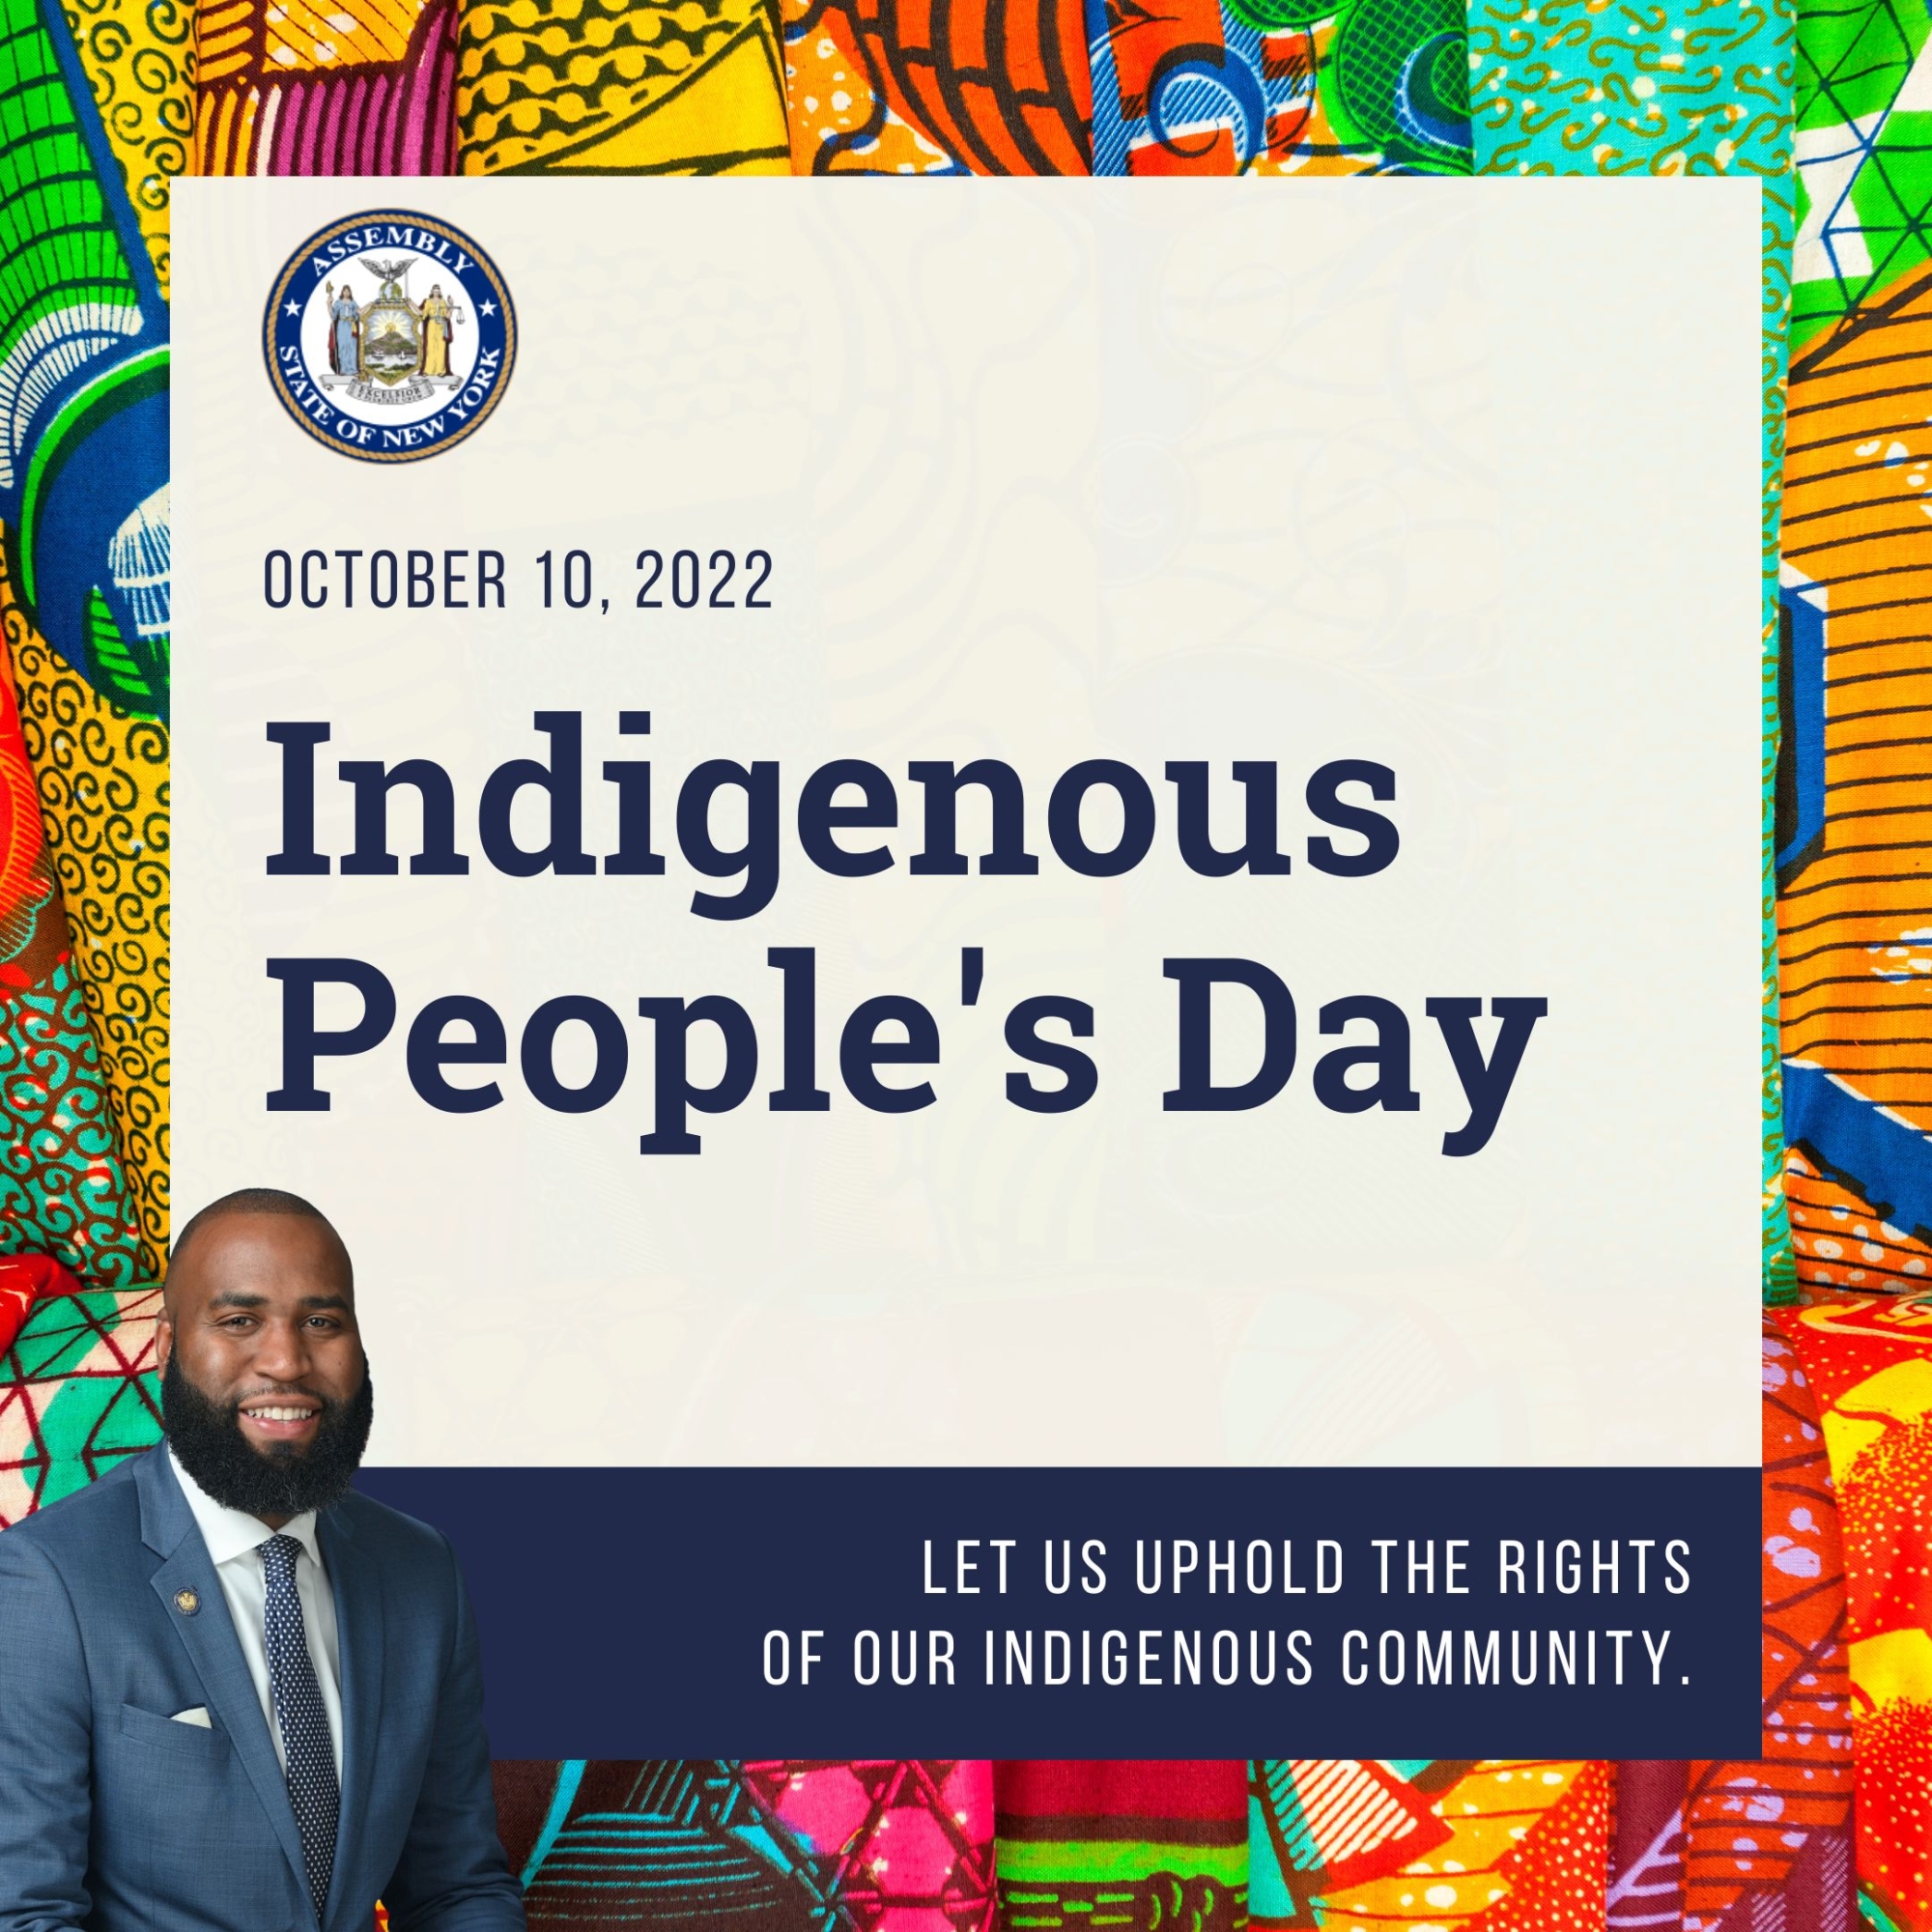 Indigenous People's Day Oct. 10, 2022